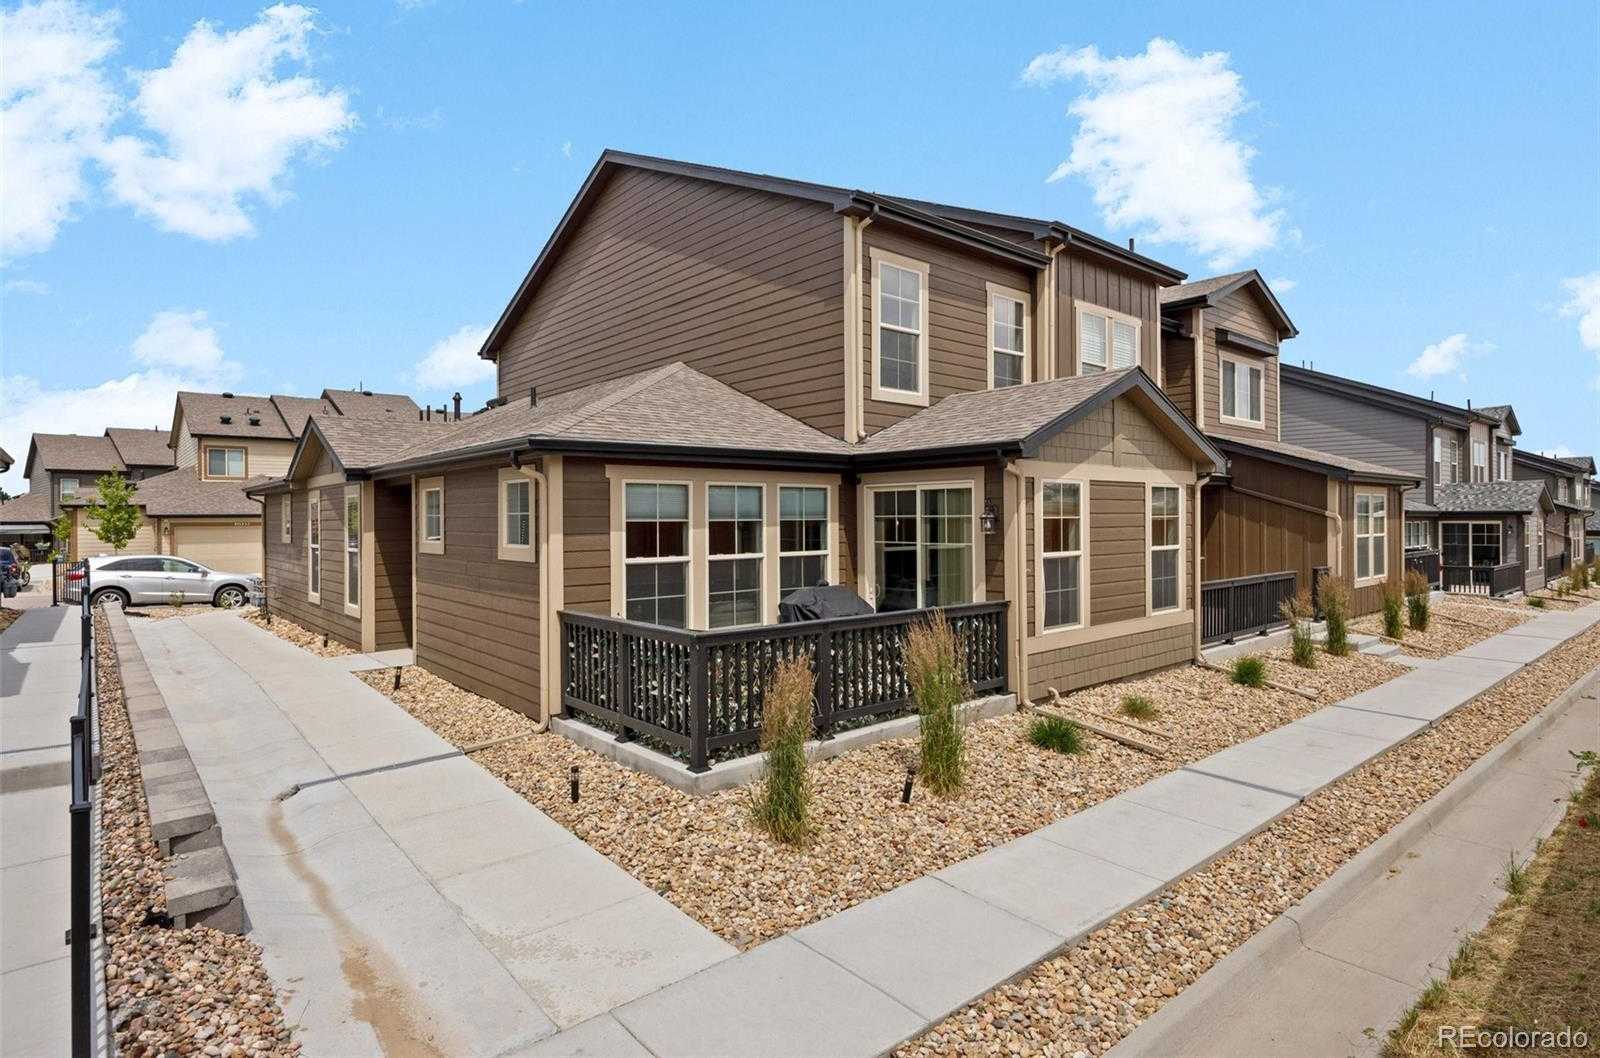 View Parker, CO 80138 townhome